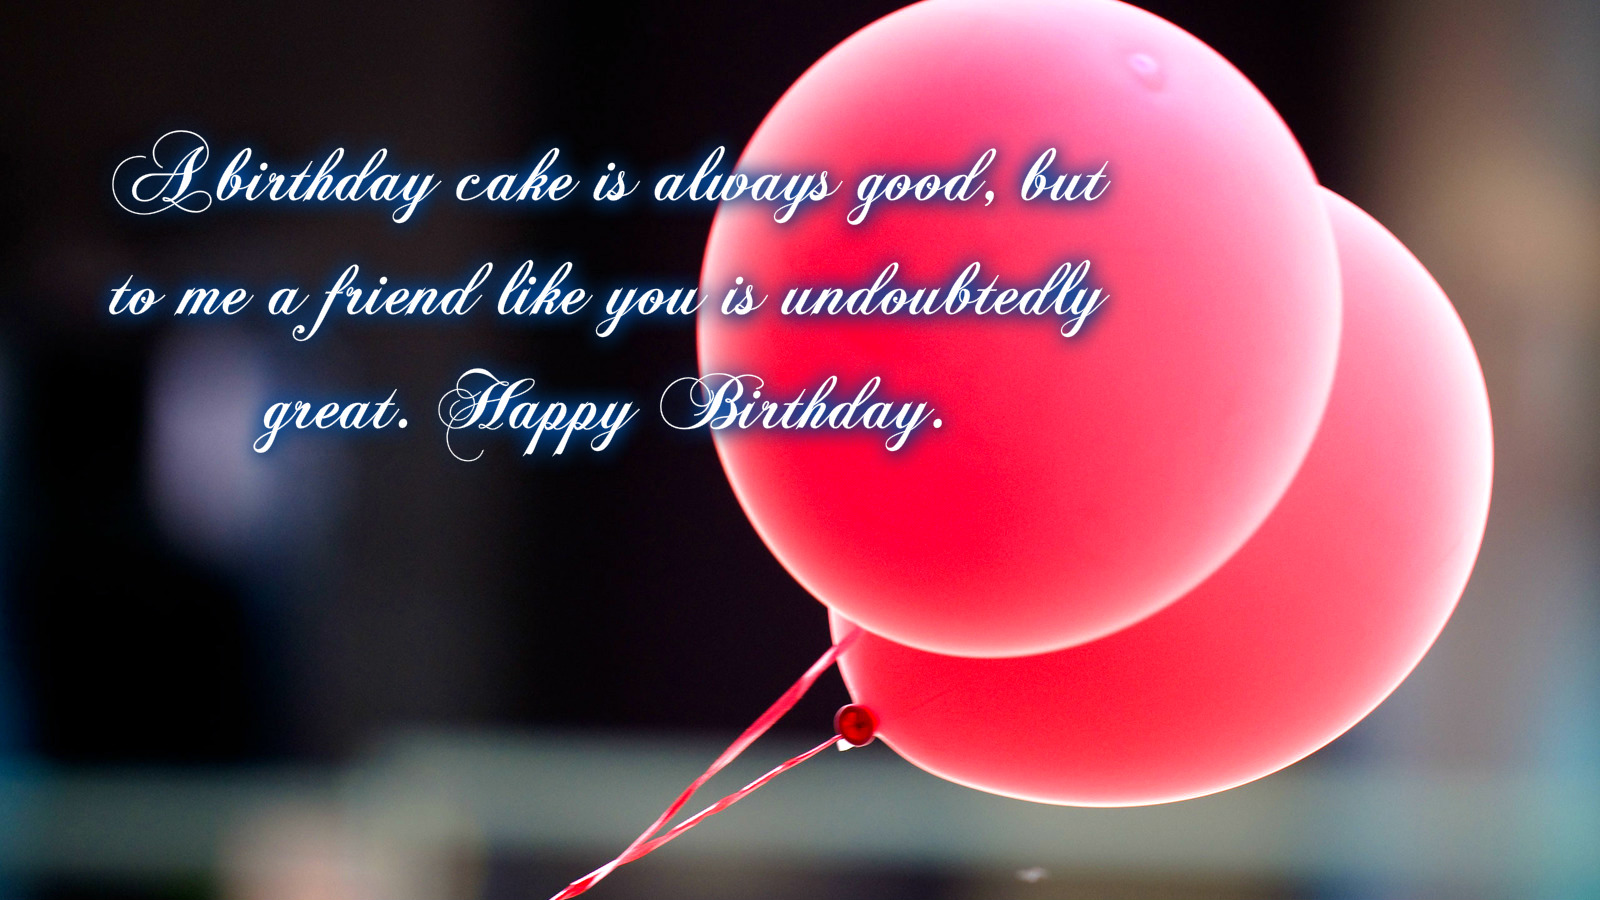 Balloons Party Theme HD Image with quote (6)